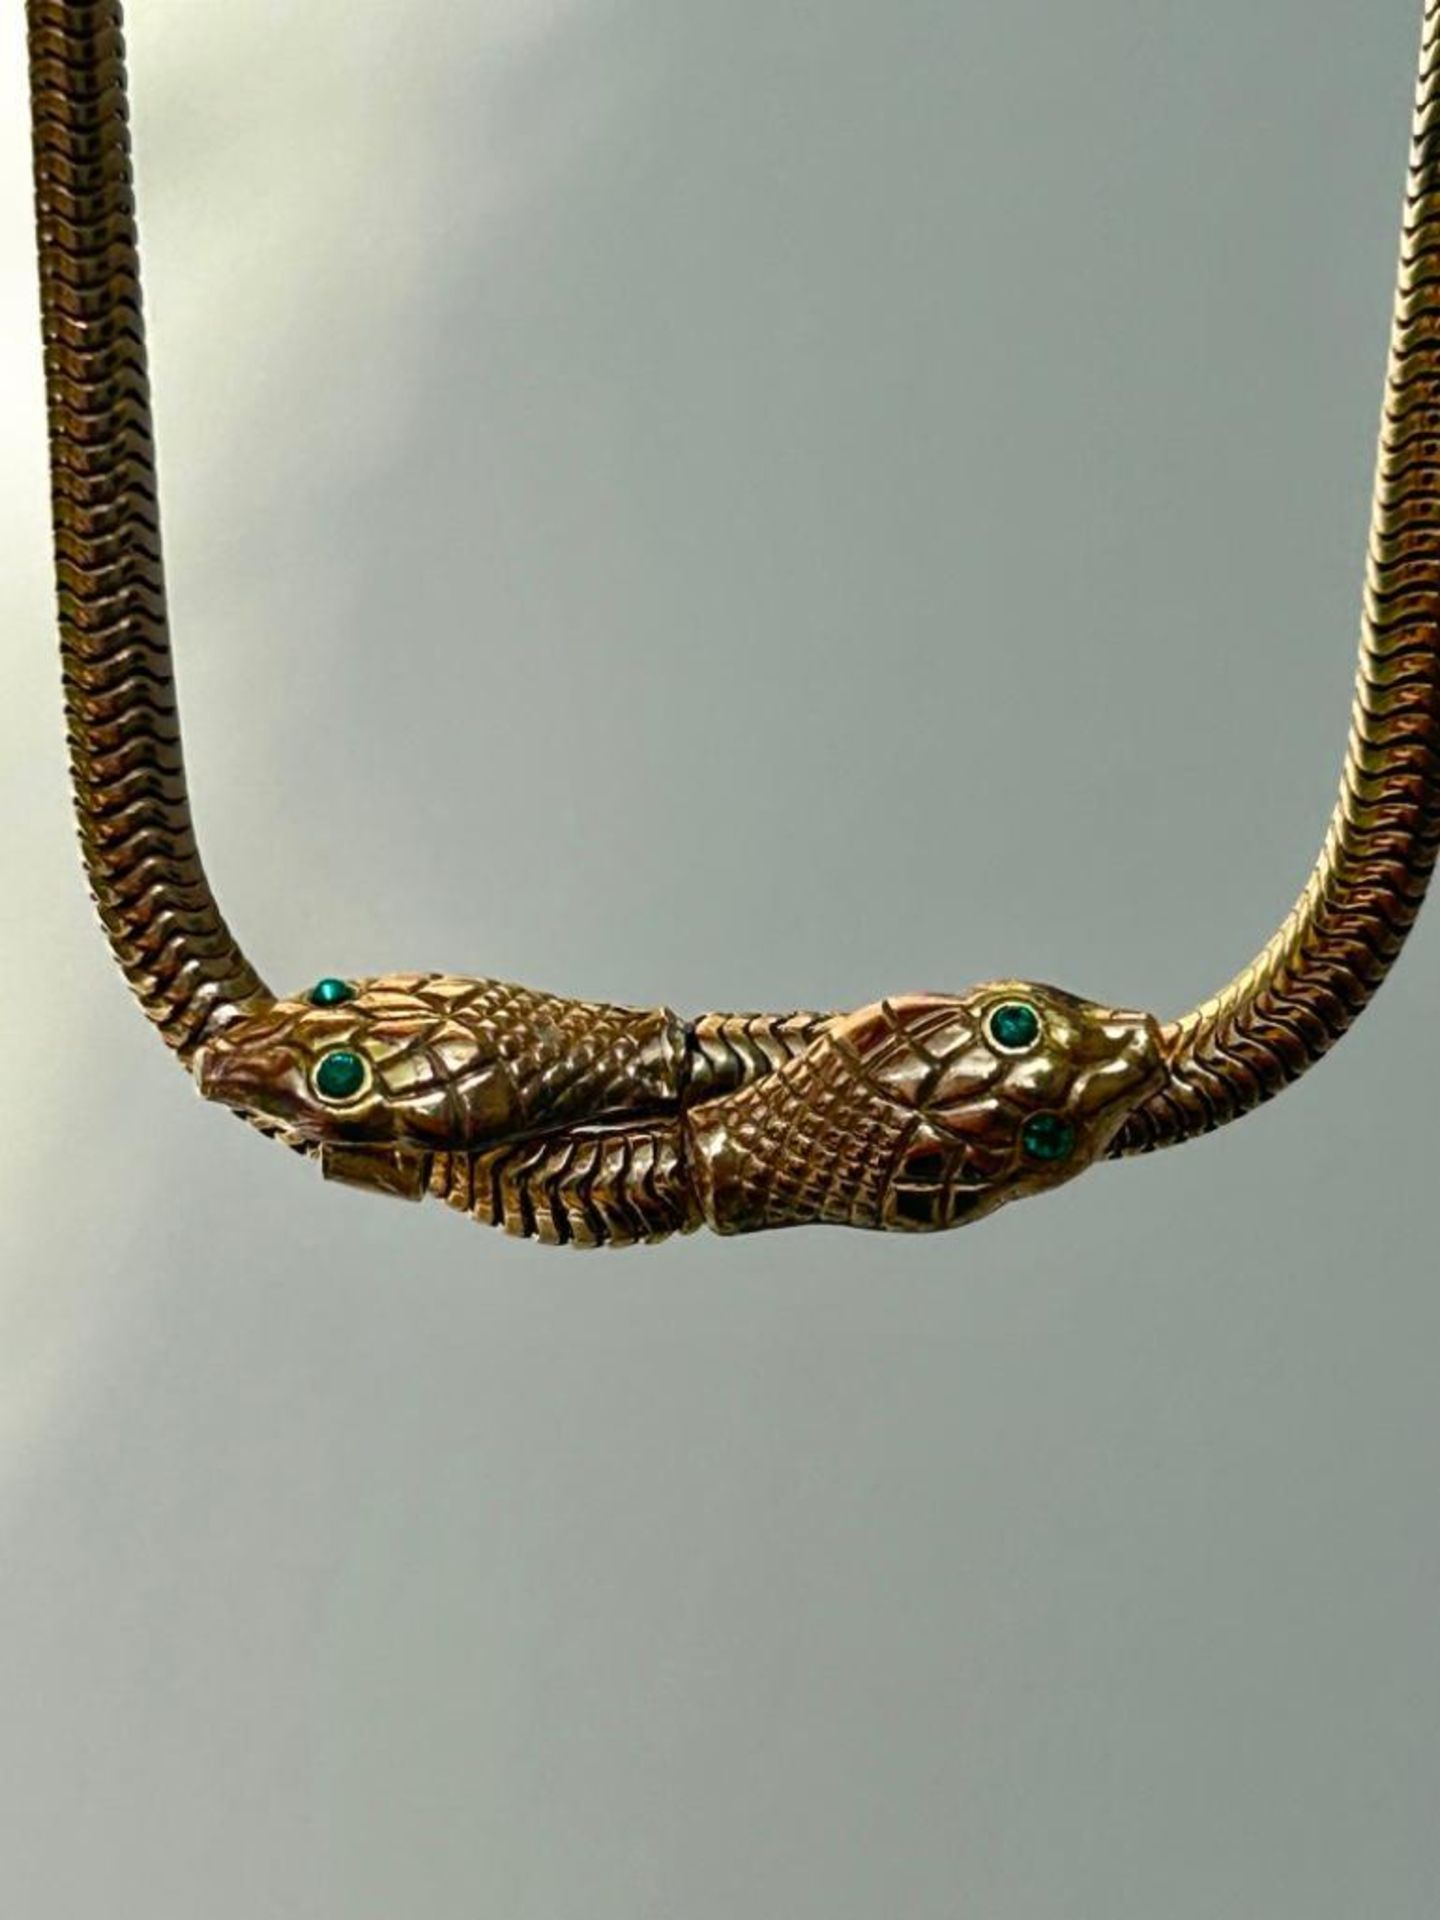 Double Headed Snake Necklace - Image 5 of 7